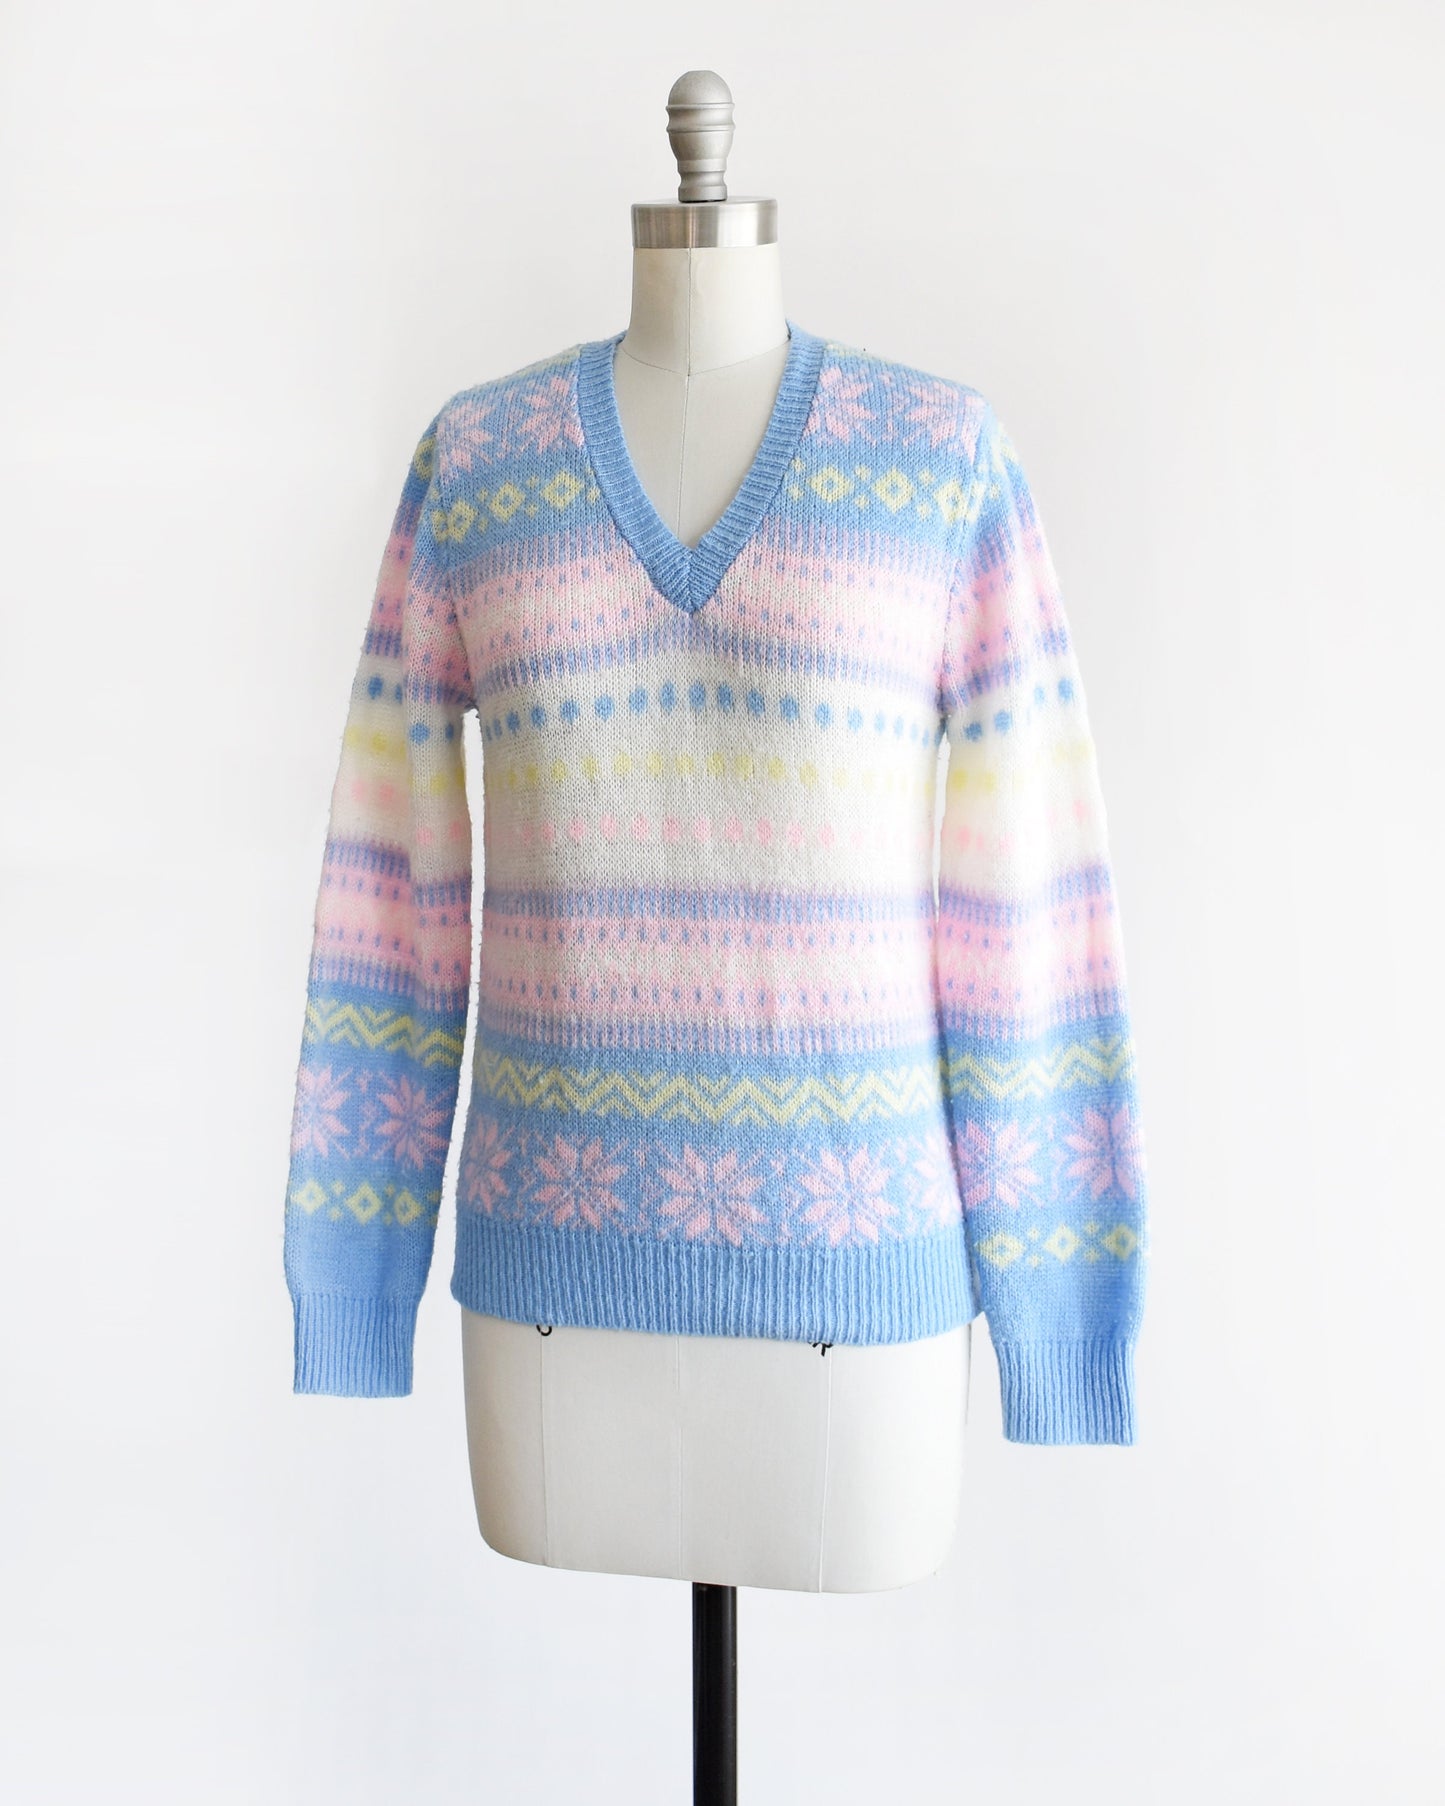 Side front view of a vintage 80s pastel striped sweater thats blue, pink, yellow, and white, and at has a snowflake and geometric stripe print on a dress form.